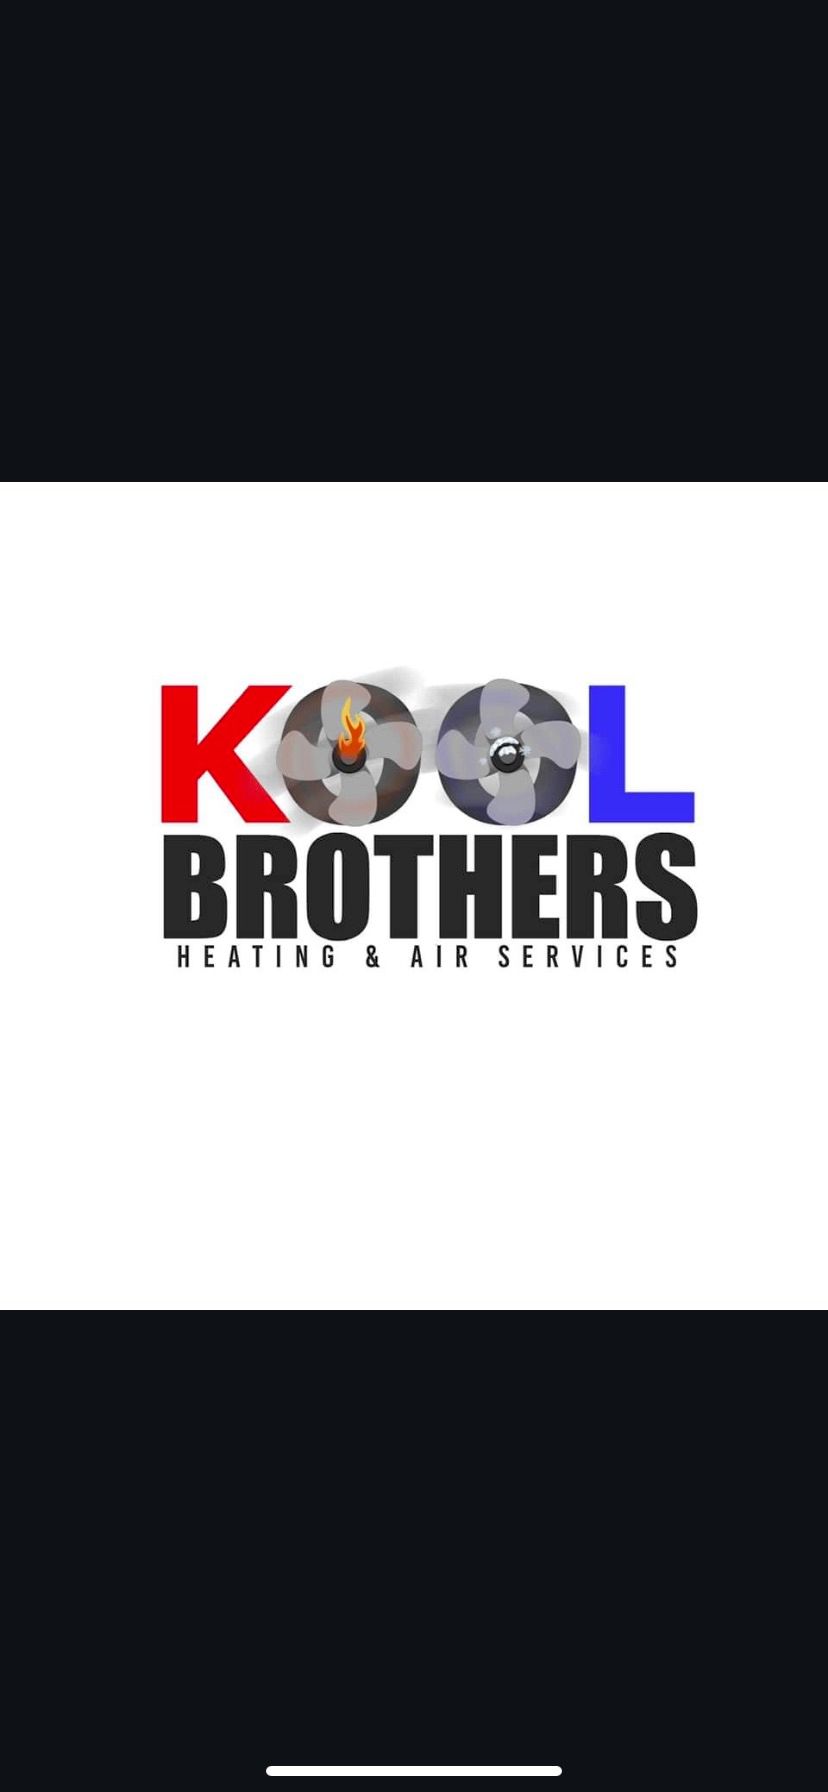 Kool Brothers Heating and Air Services